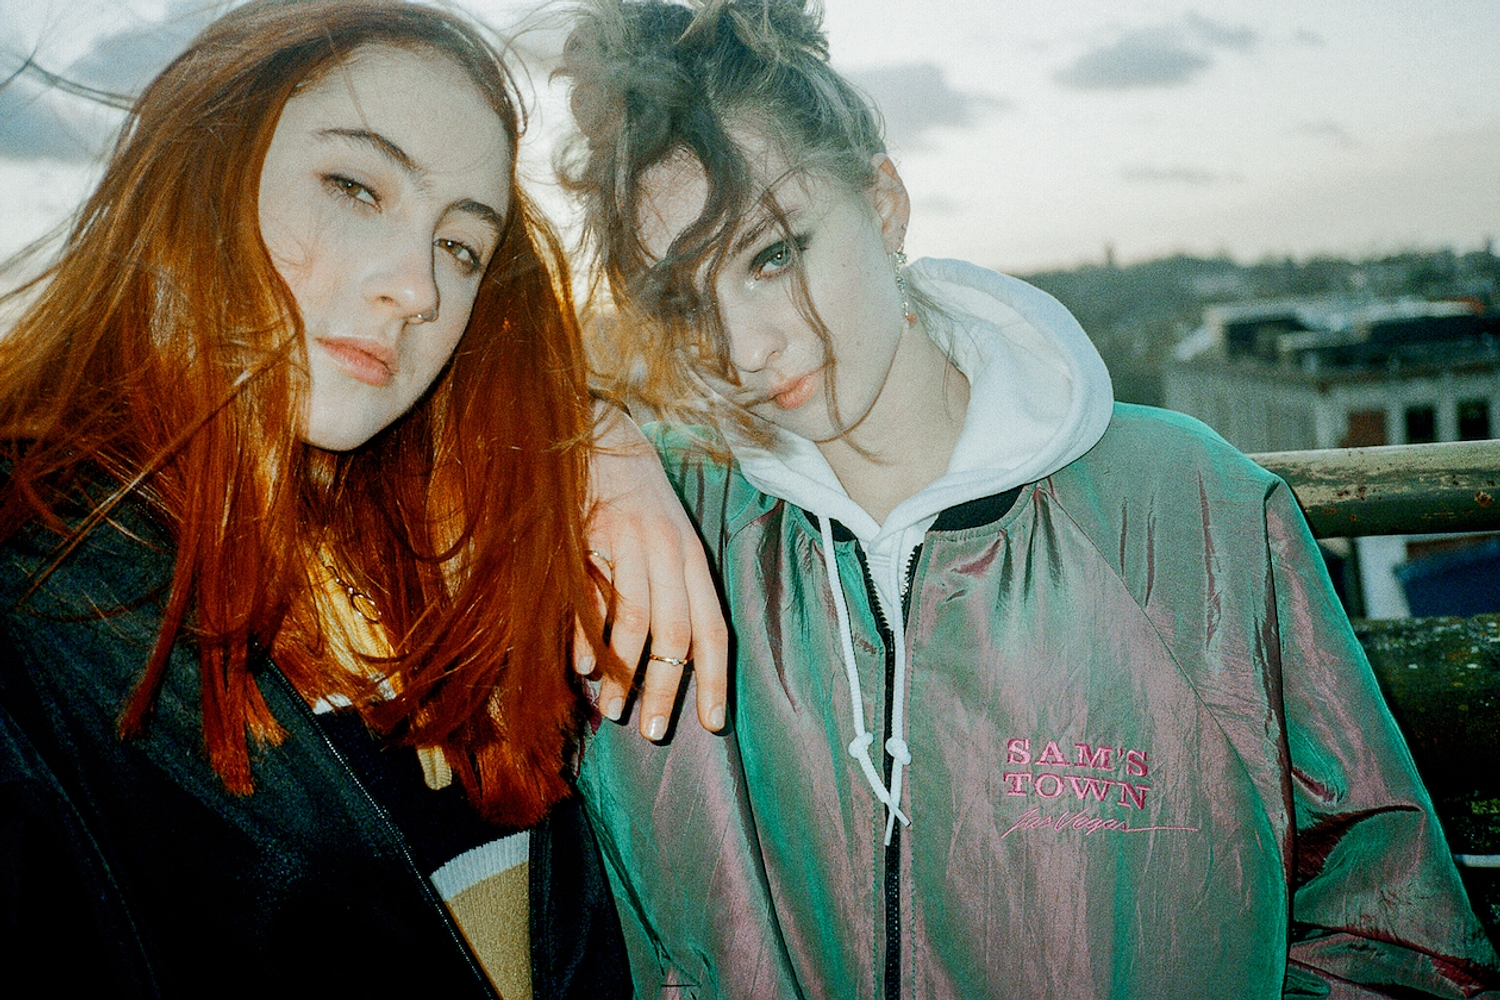 Let's Eat Grandma, Yonaka, Starcrawler and more added to Reading & Leeds 2018 line-up